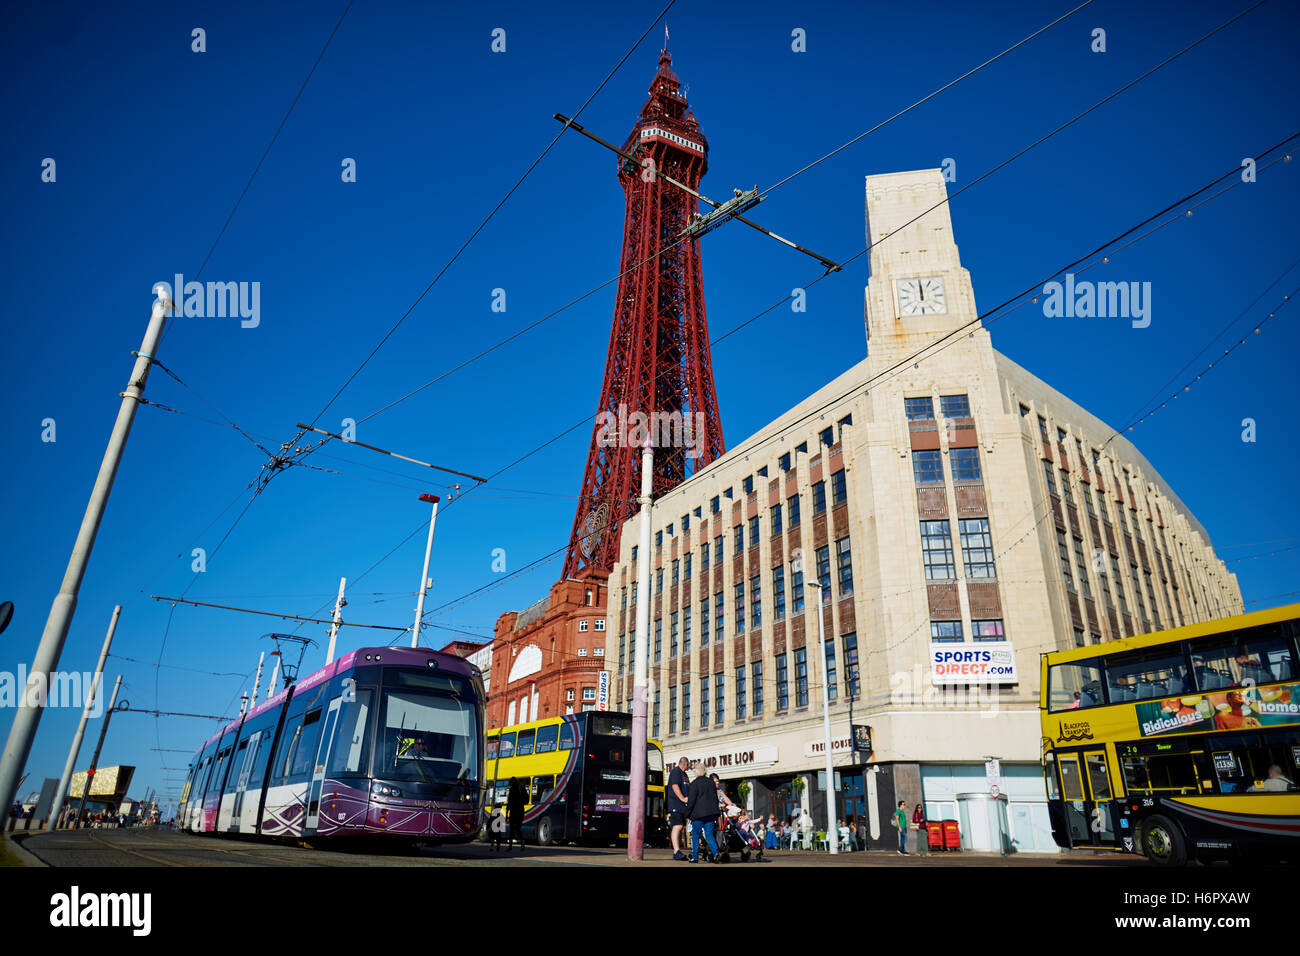 Blackpool ftower modern tram light rail  Holiday sea side town resort Lancashire tourist attractions  tower copyspace blue sky d Stock Photo